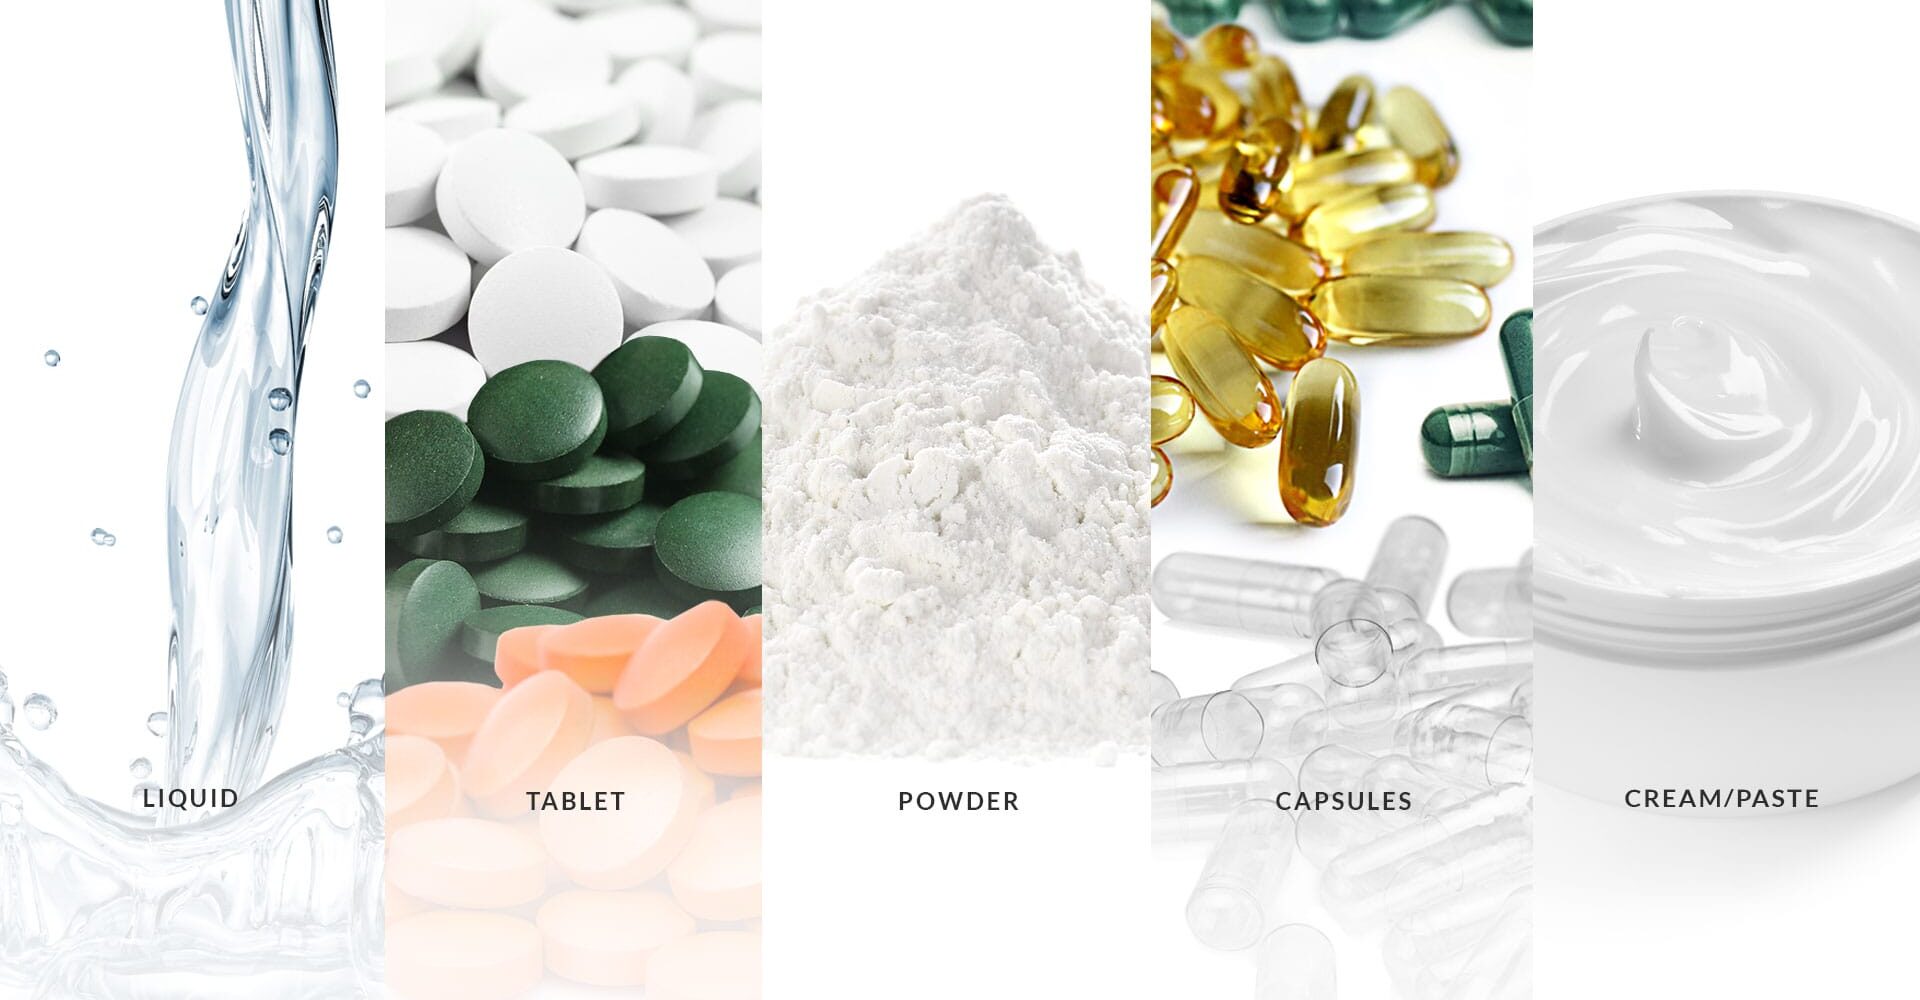 Liquid health supplement manufacturing, Tablet formulation development, Powder product OEM manufacturing, Capsule health products ODM, Cream and paste wellness products.